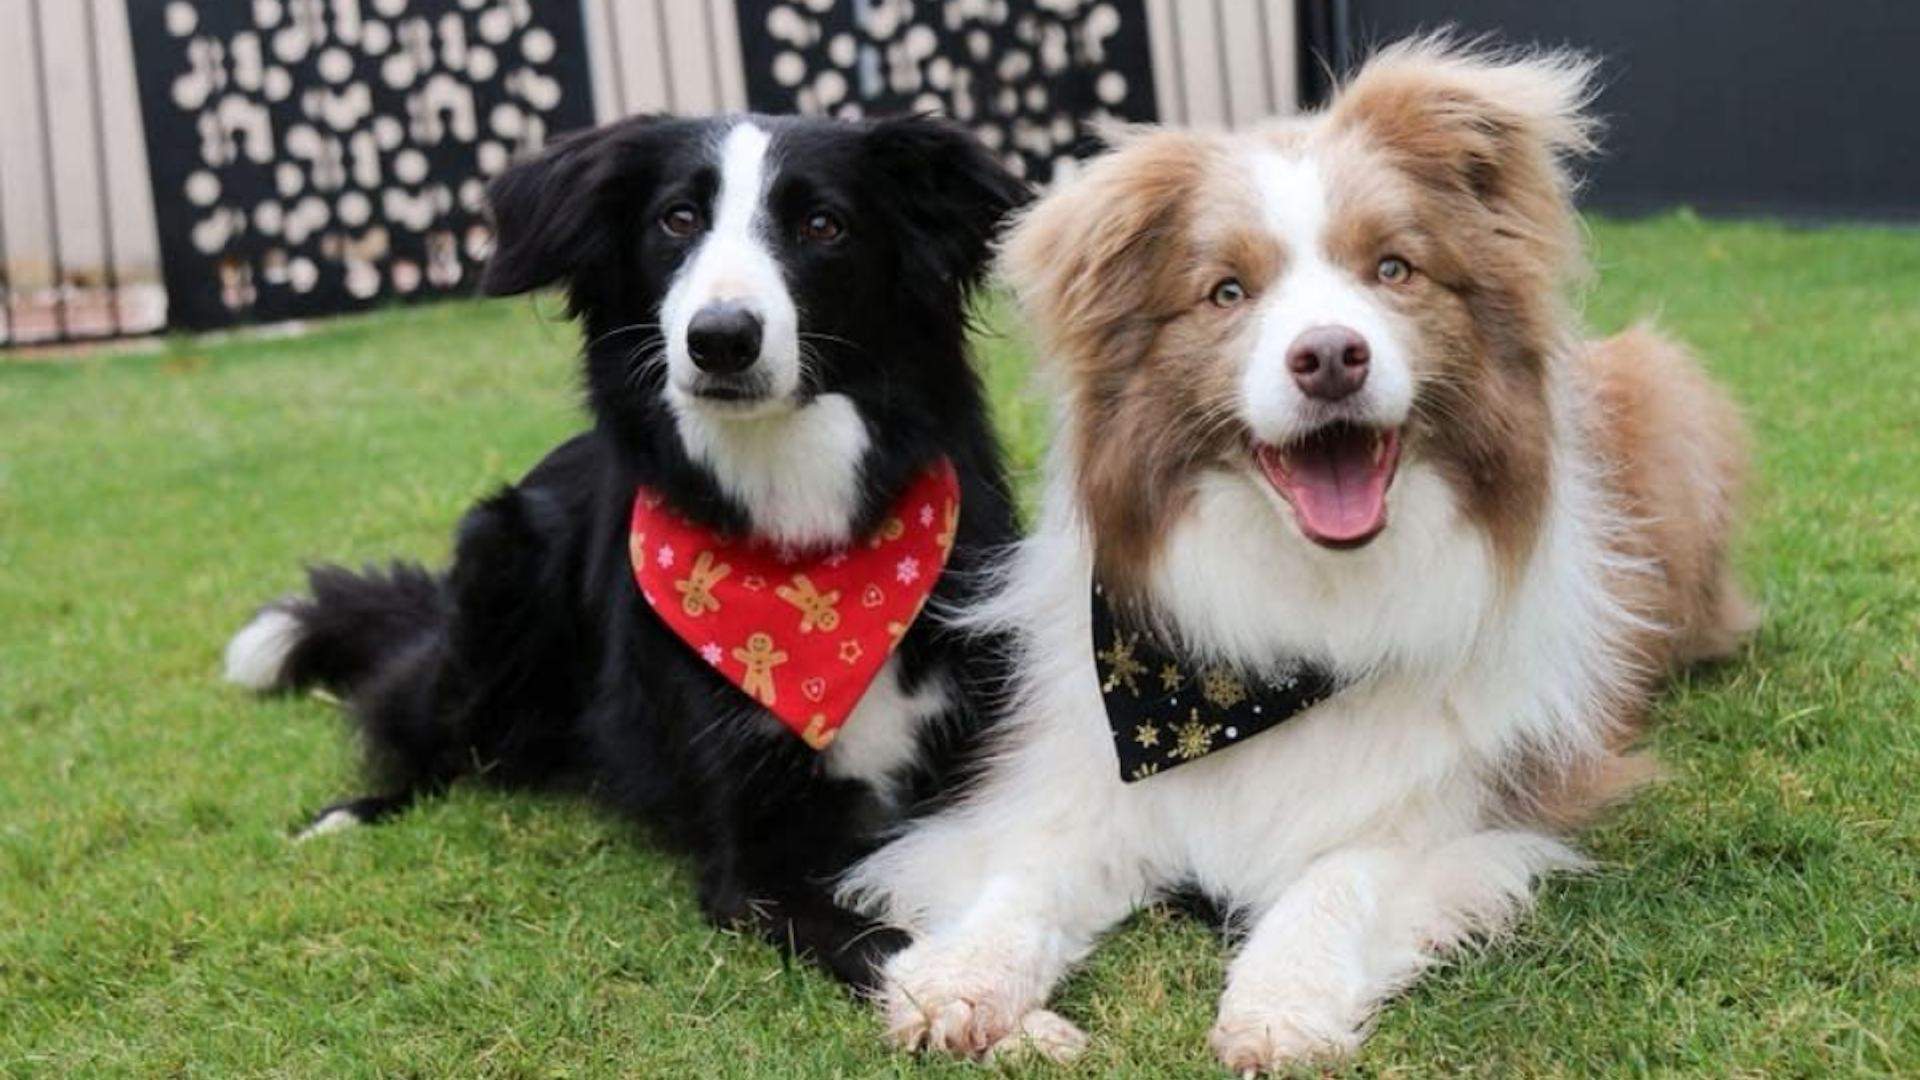 Ivory Coat Is Searching for 20 Adorable Dogs to Star in Its Next TV Commercial